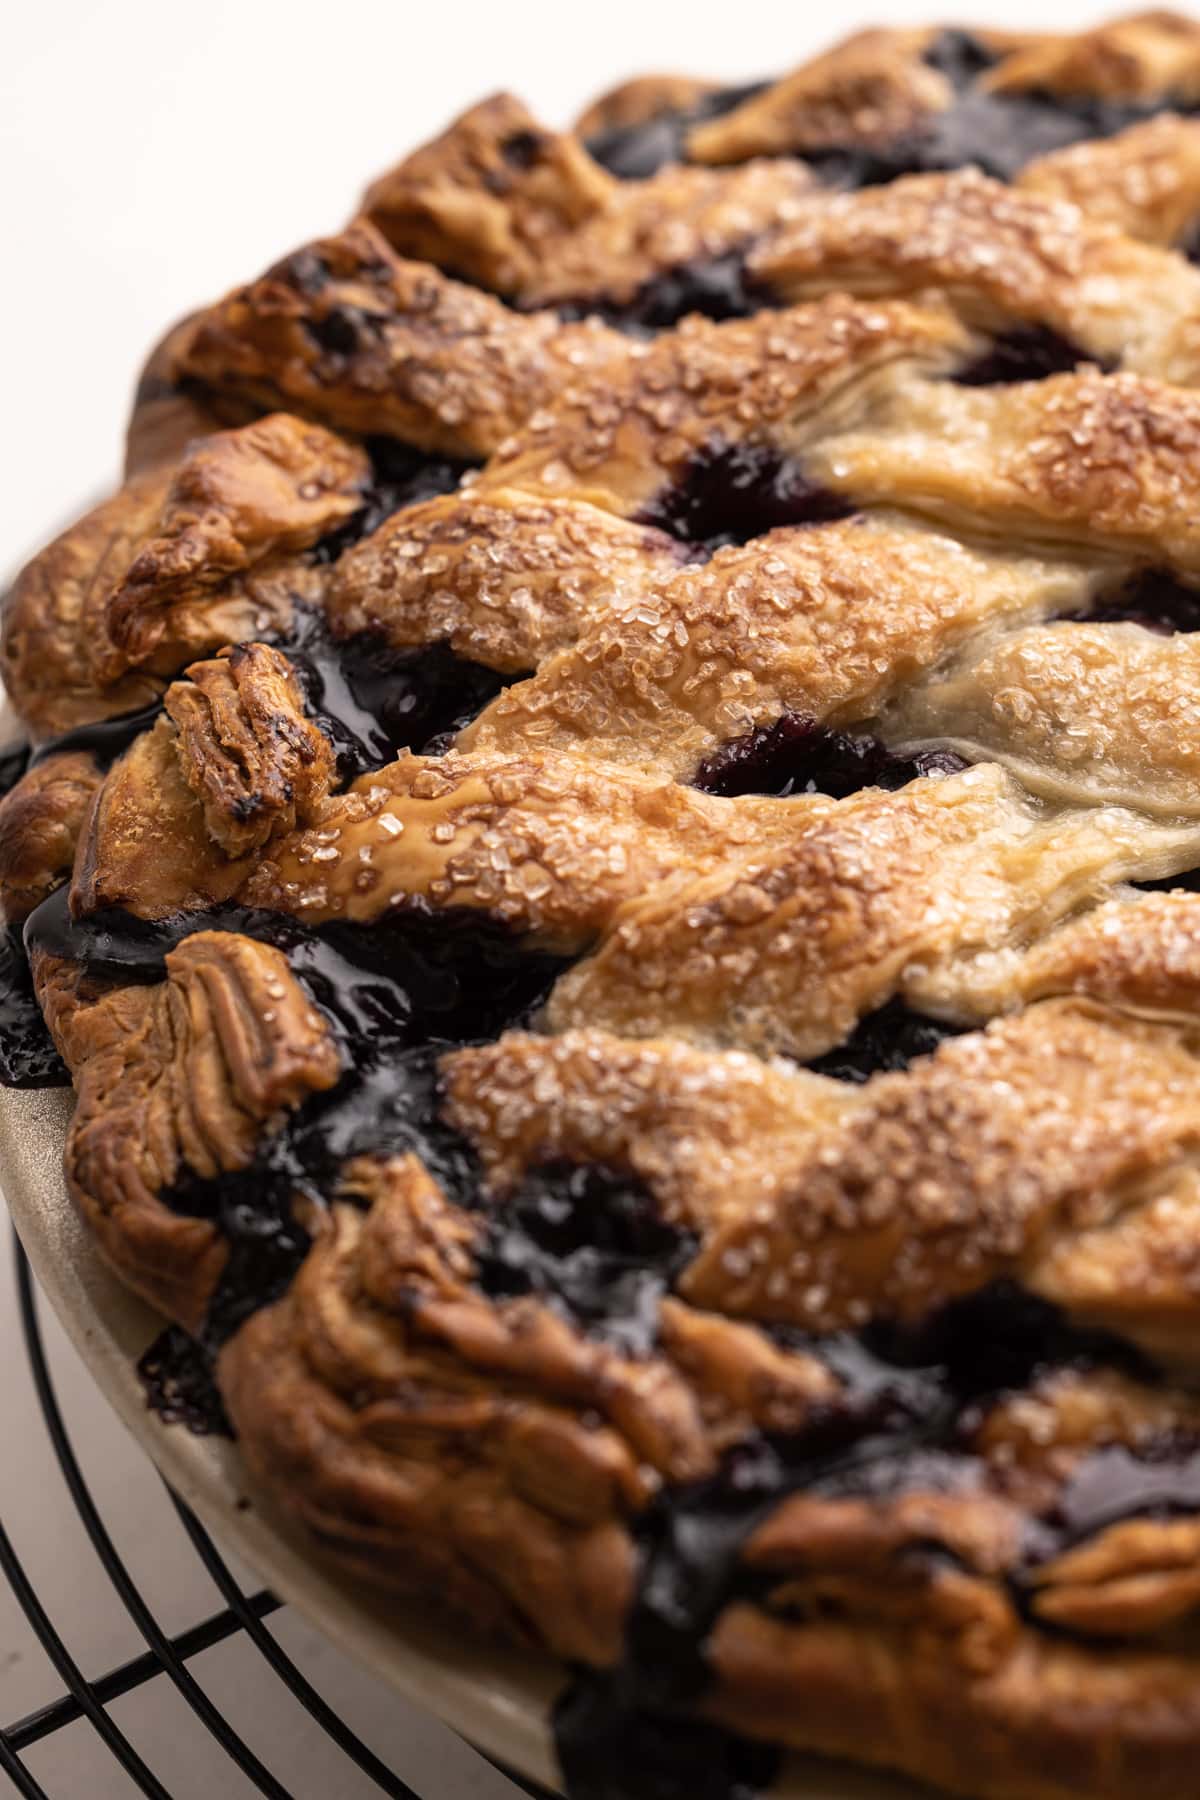 A fully baked blueberry pie.